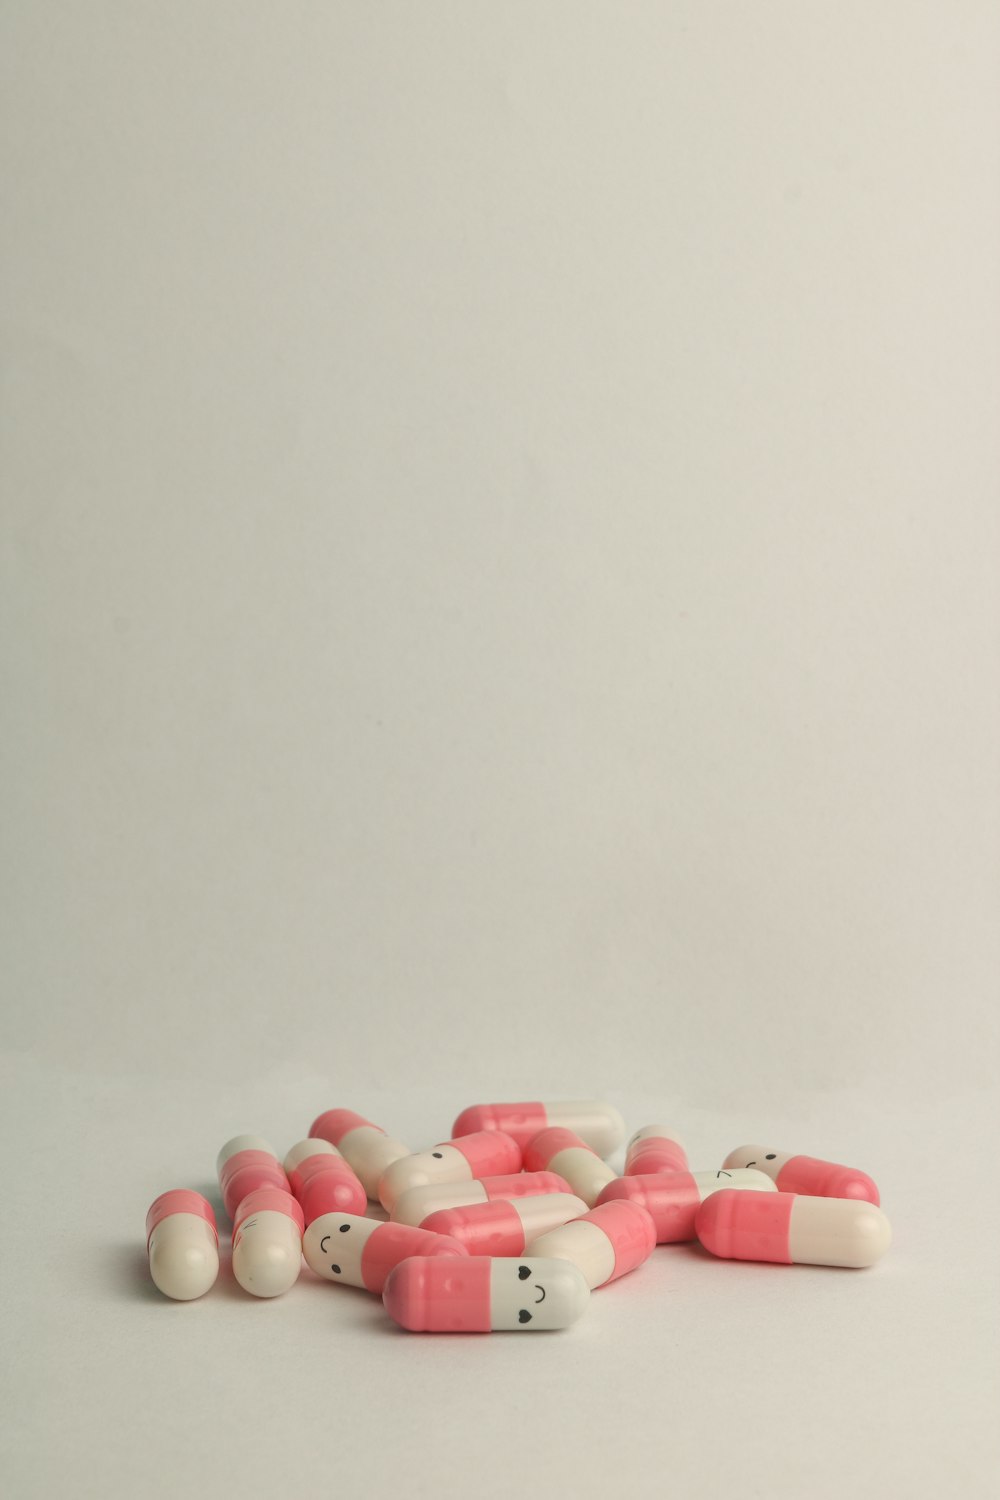 pink and white medication pill